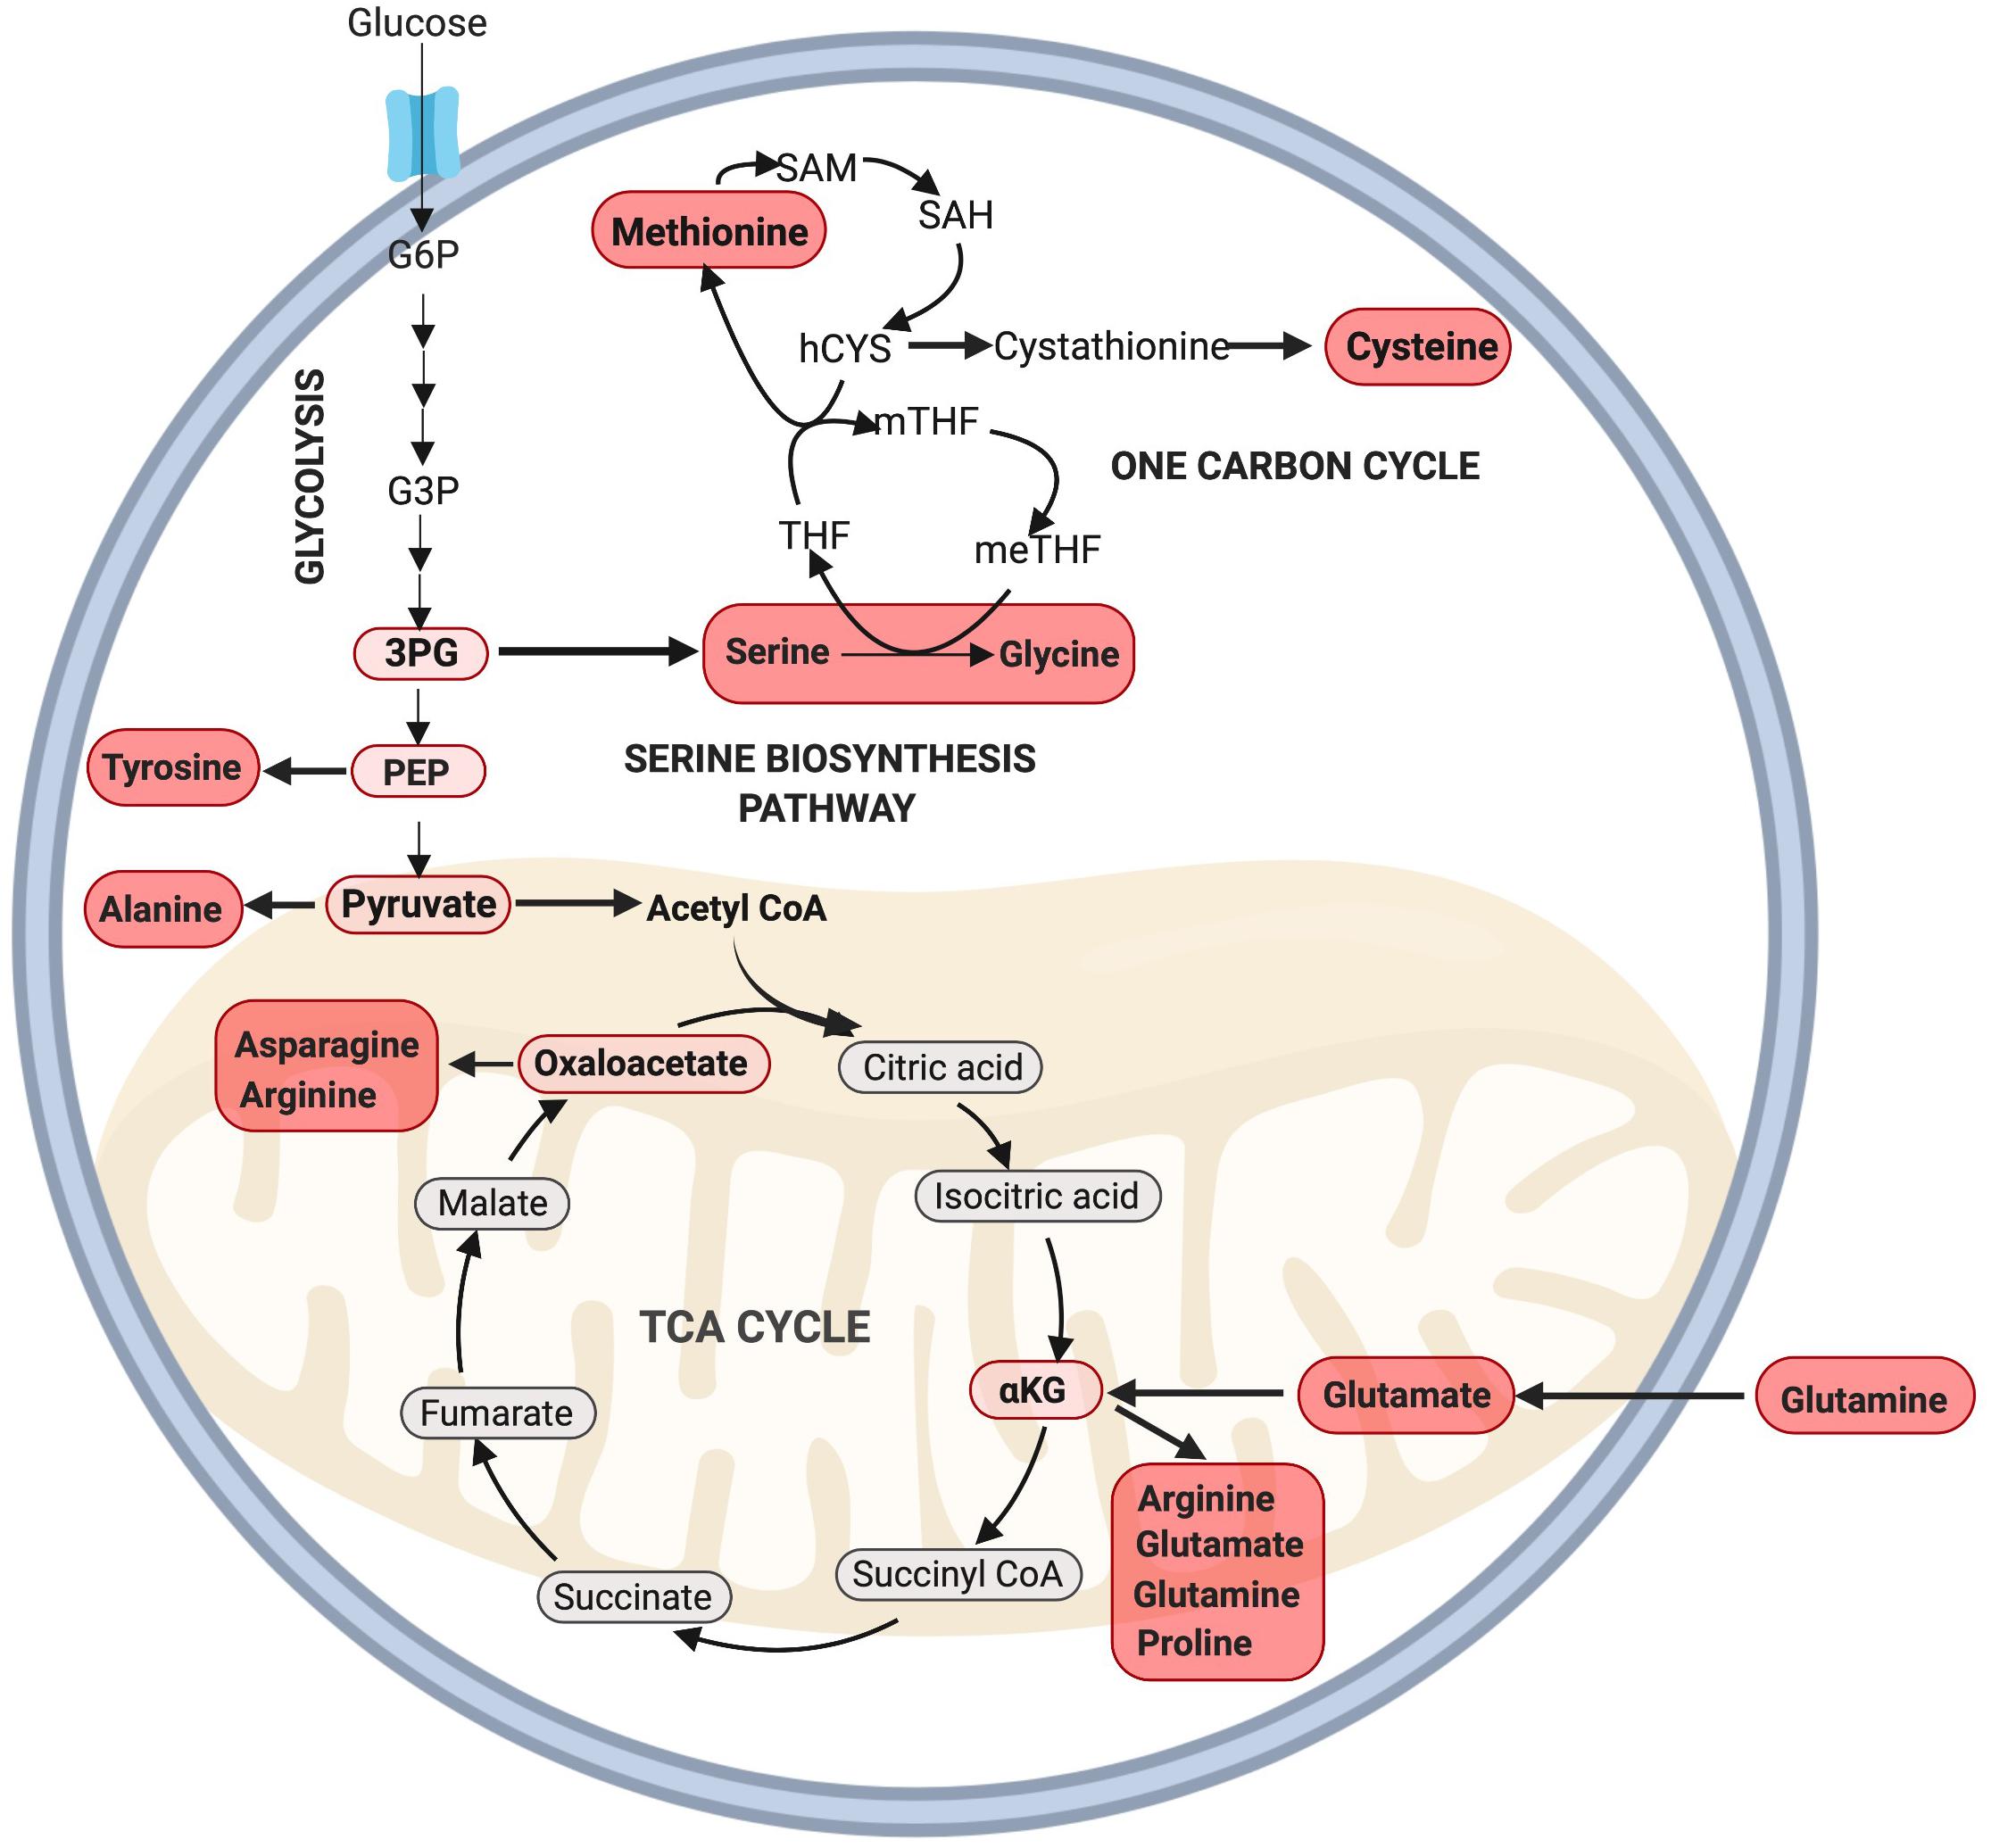 Amino Acid Synthesis Via Glycolysis, the PPP, and the TCA Cycle.